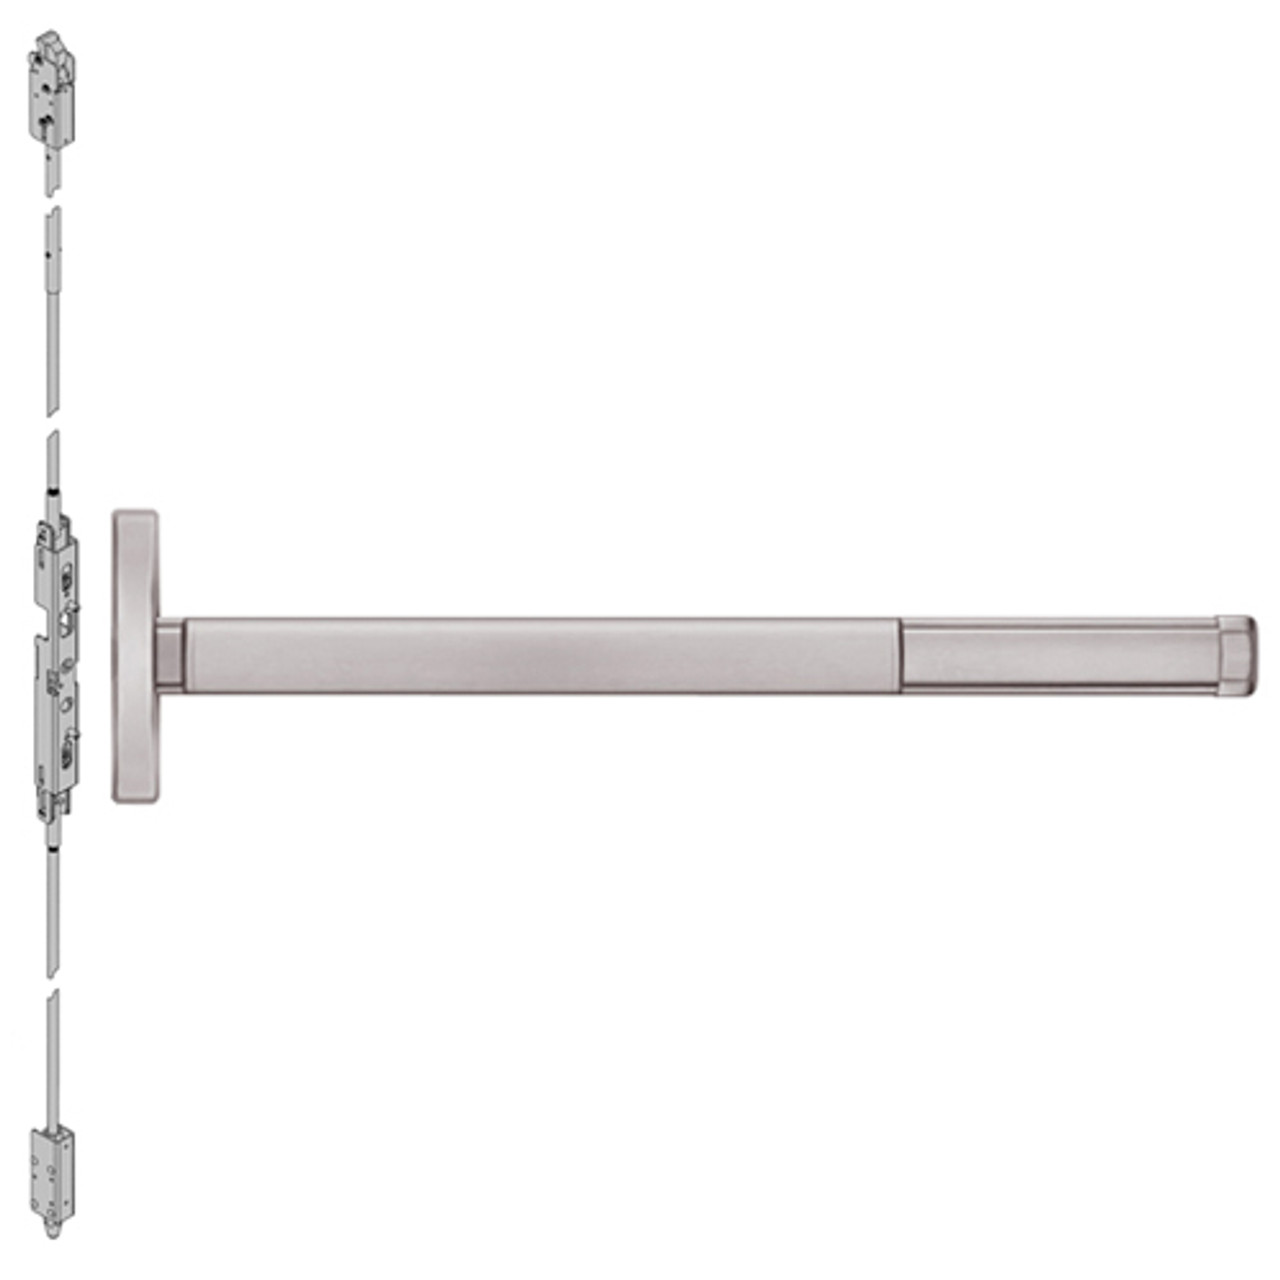 ELRFL2608-628-48 PHI 2600 Series Fire Rated Concealed Vertical Rod Exit Device with Electric Latch Retraction Prepped for Key Controls Lever in Satin Aluminum Finish